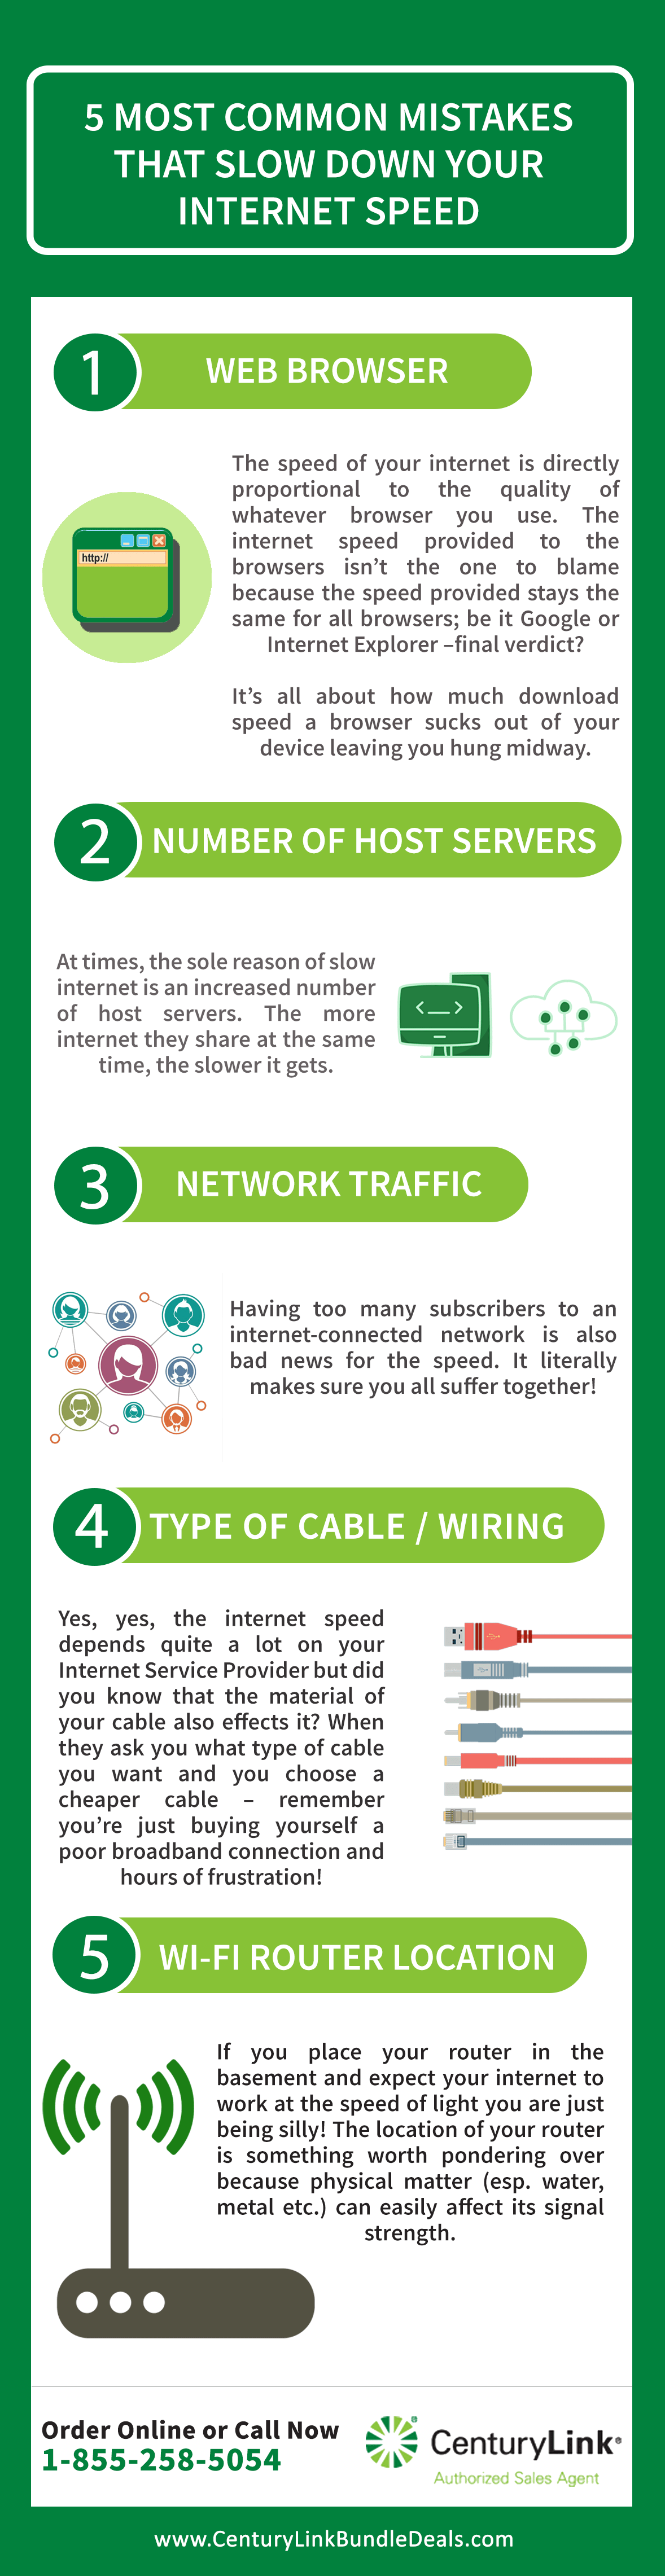 Mistakes That Slow Down Internet Speed